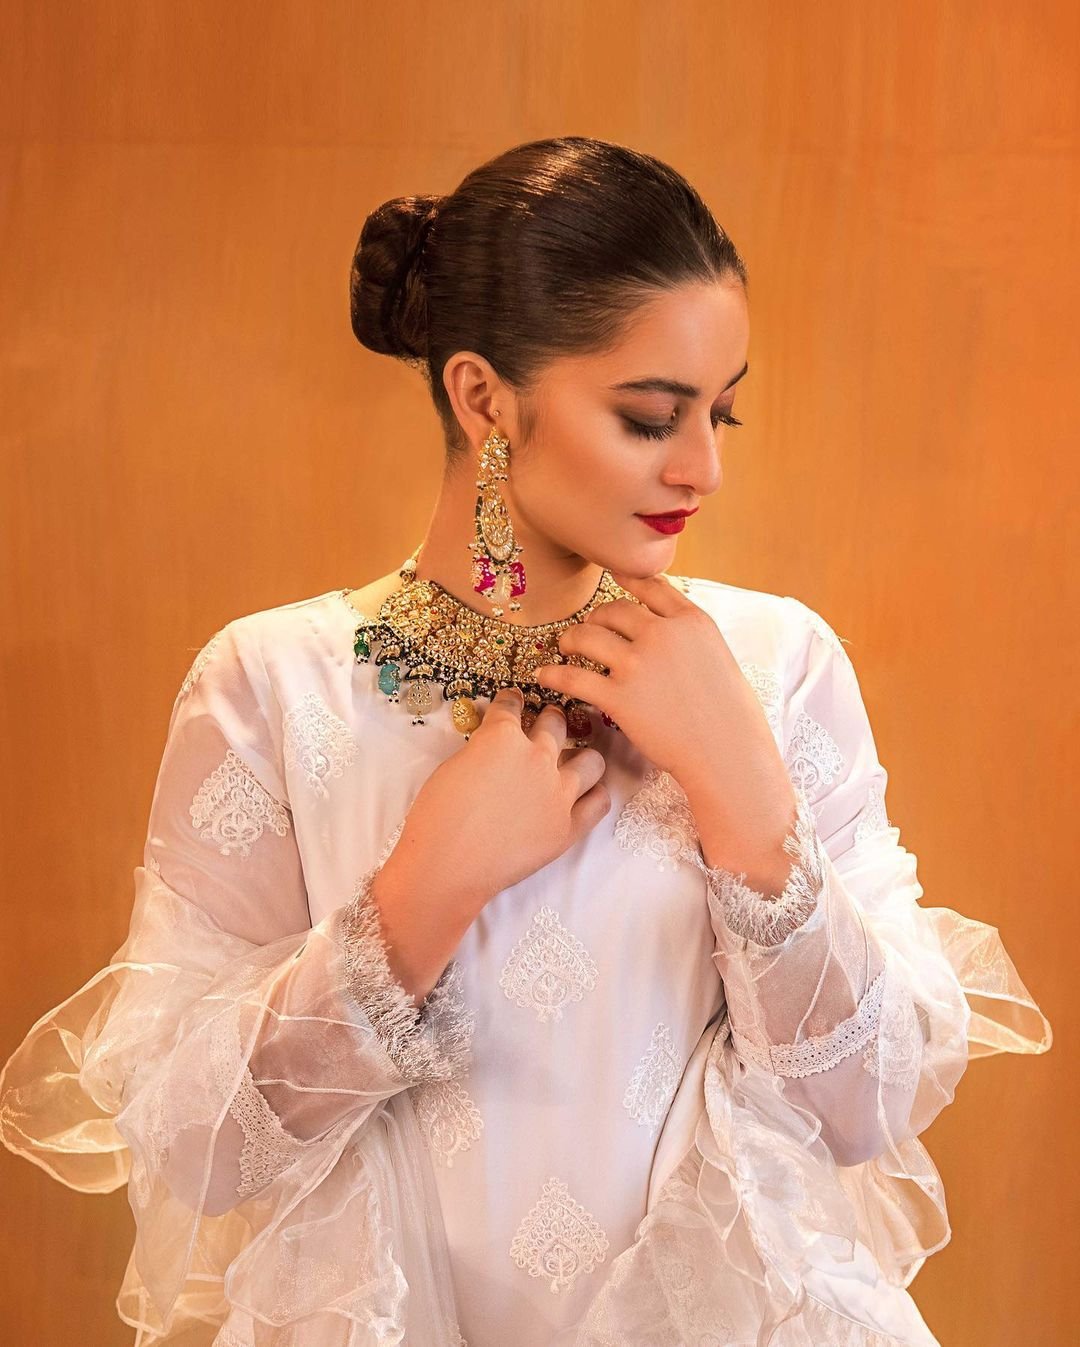 Aiman Khan channels her Glamour in White Attire